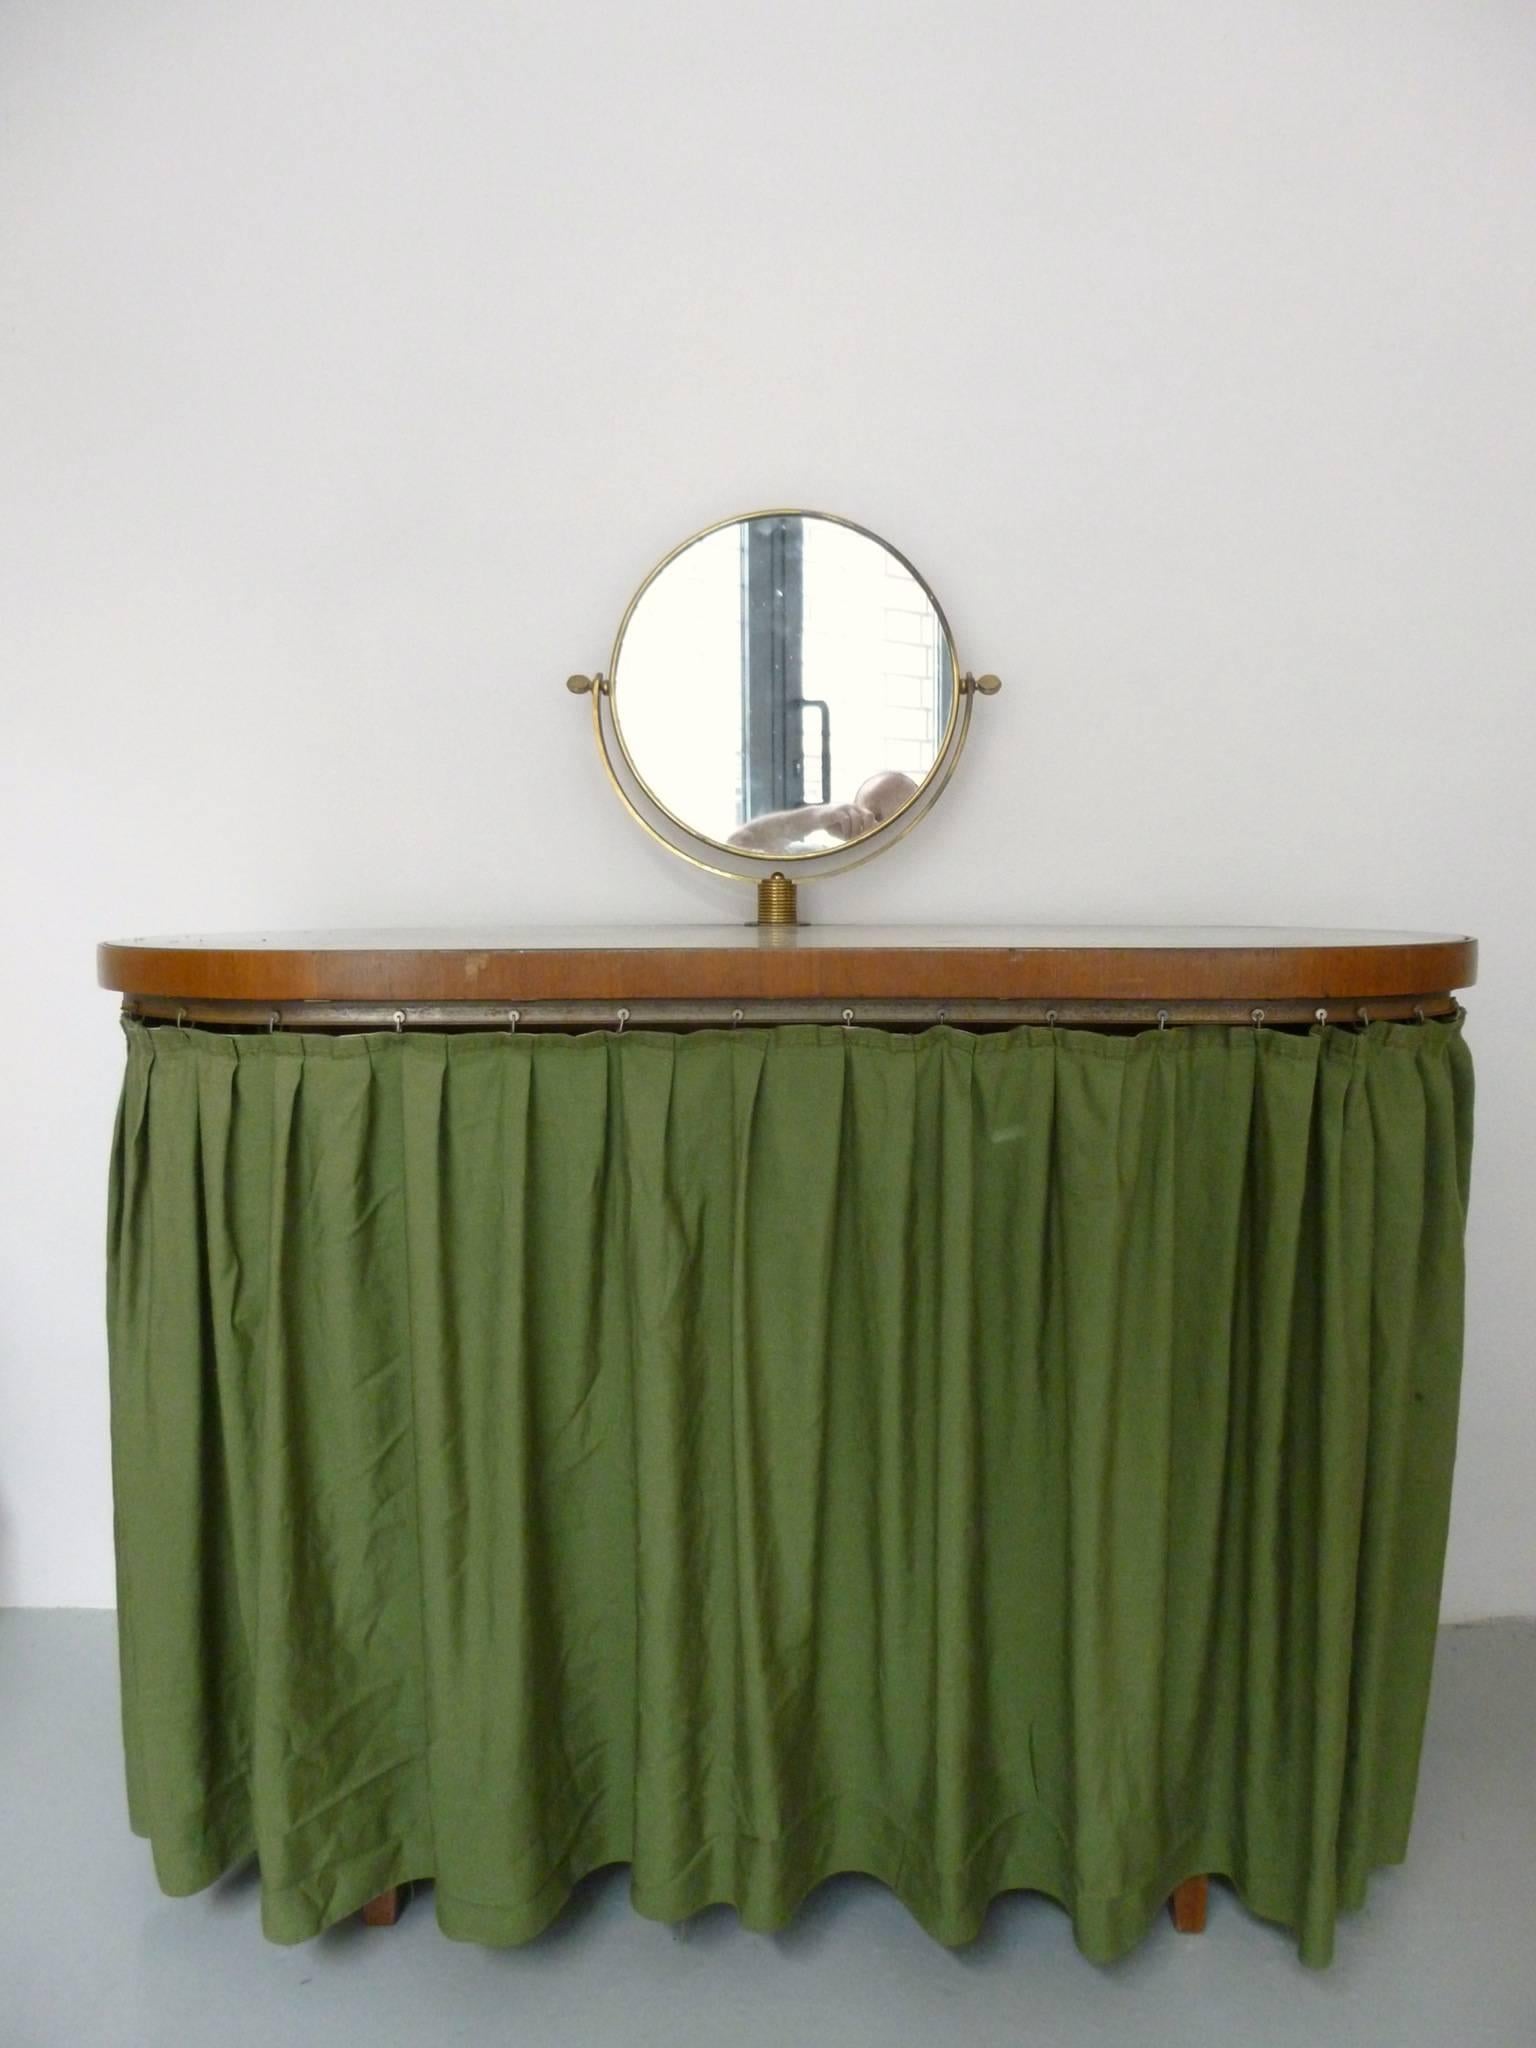 Cabinet or dressing table. Mahogany wood front with two drawers and three compartments, glass top, mirror with brass edge. Gio Ponti, circa 1960.
Provenance: Einaudi family, with the correspondence
Available Authenticity certificate.